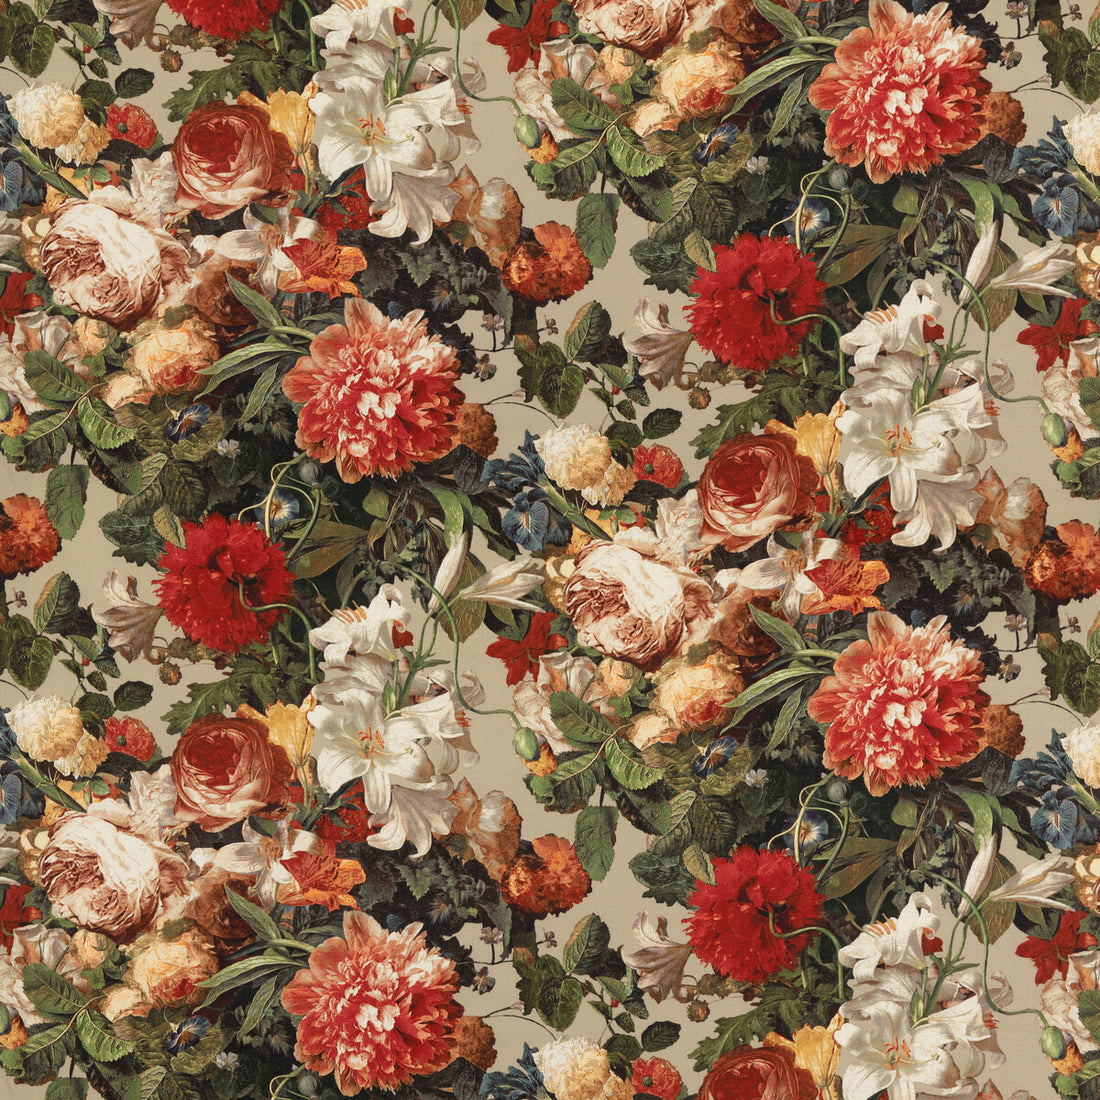 Floral Pompadour fabric in spice color - pattern FD301.T30.0 - by Mulberry in the Modern Country I collection